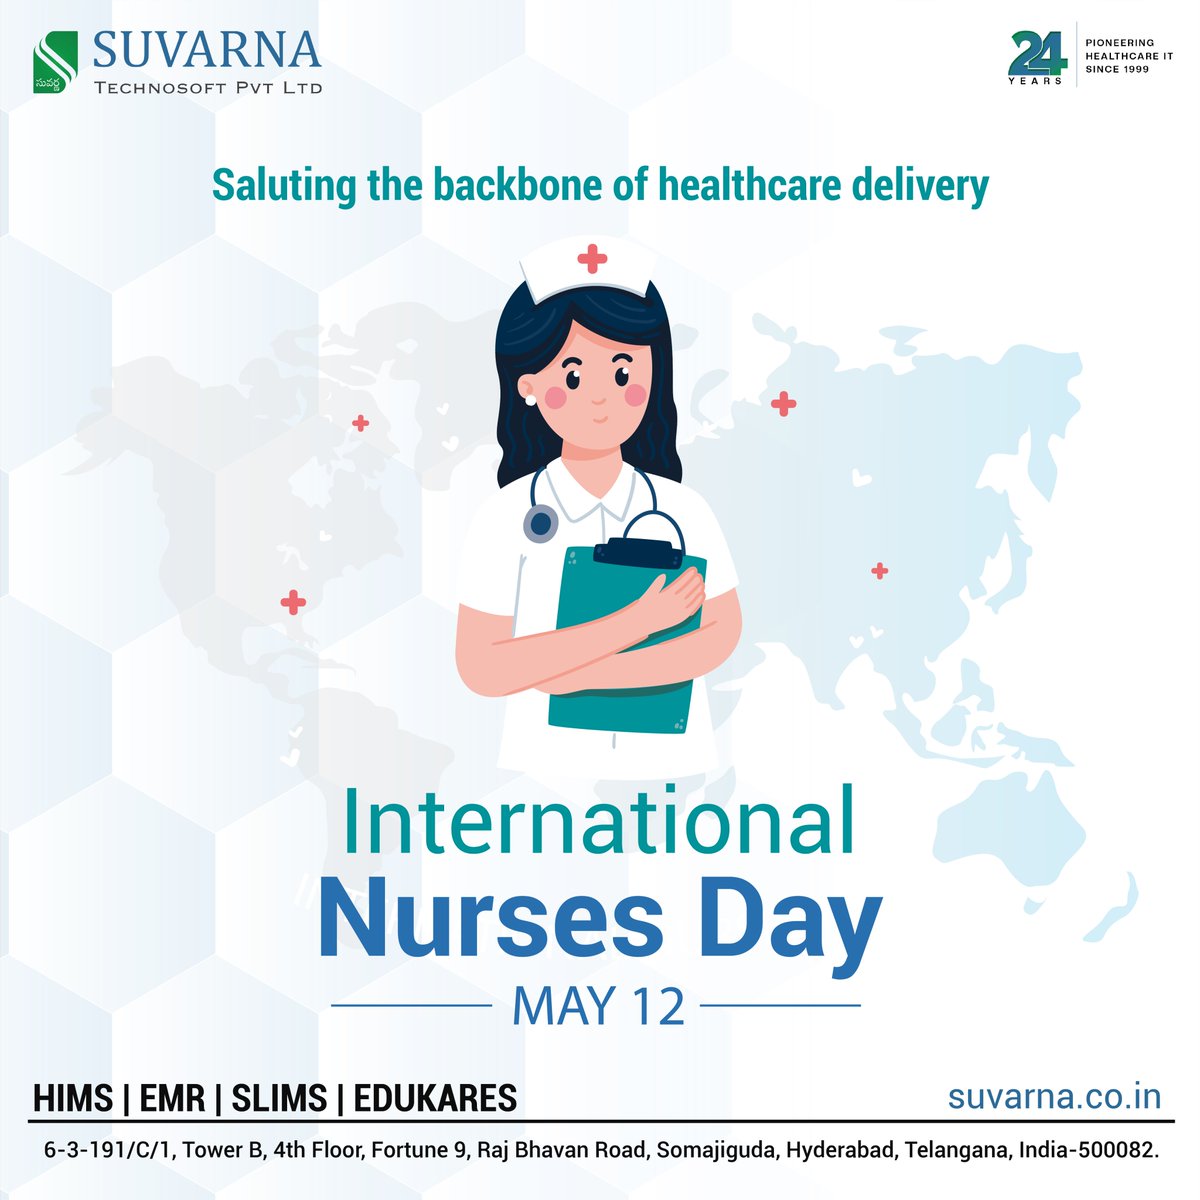 Today, we celebrate the heartbeat of healthcare. To all the dedicated nurses around the globe, your compassion, expertise, and resilience light up the world. Happy International Nurses Day! #NursesDay #HealthcareHeroes  #Suvarnatechnosoft #HealthcareIT #Hospitalsoftware